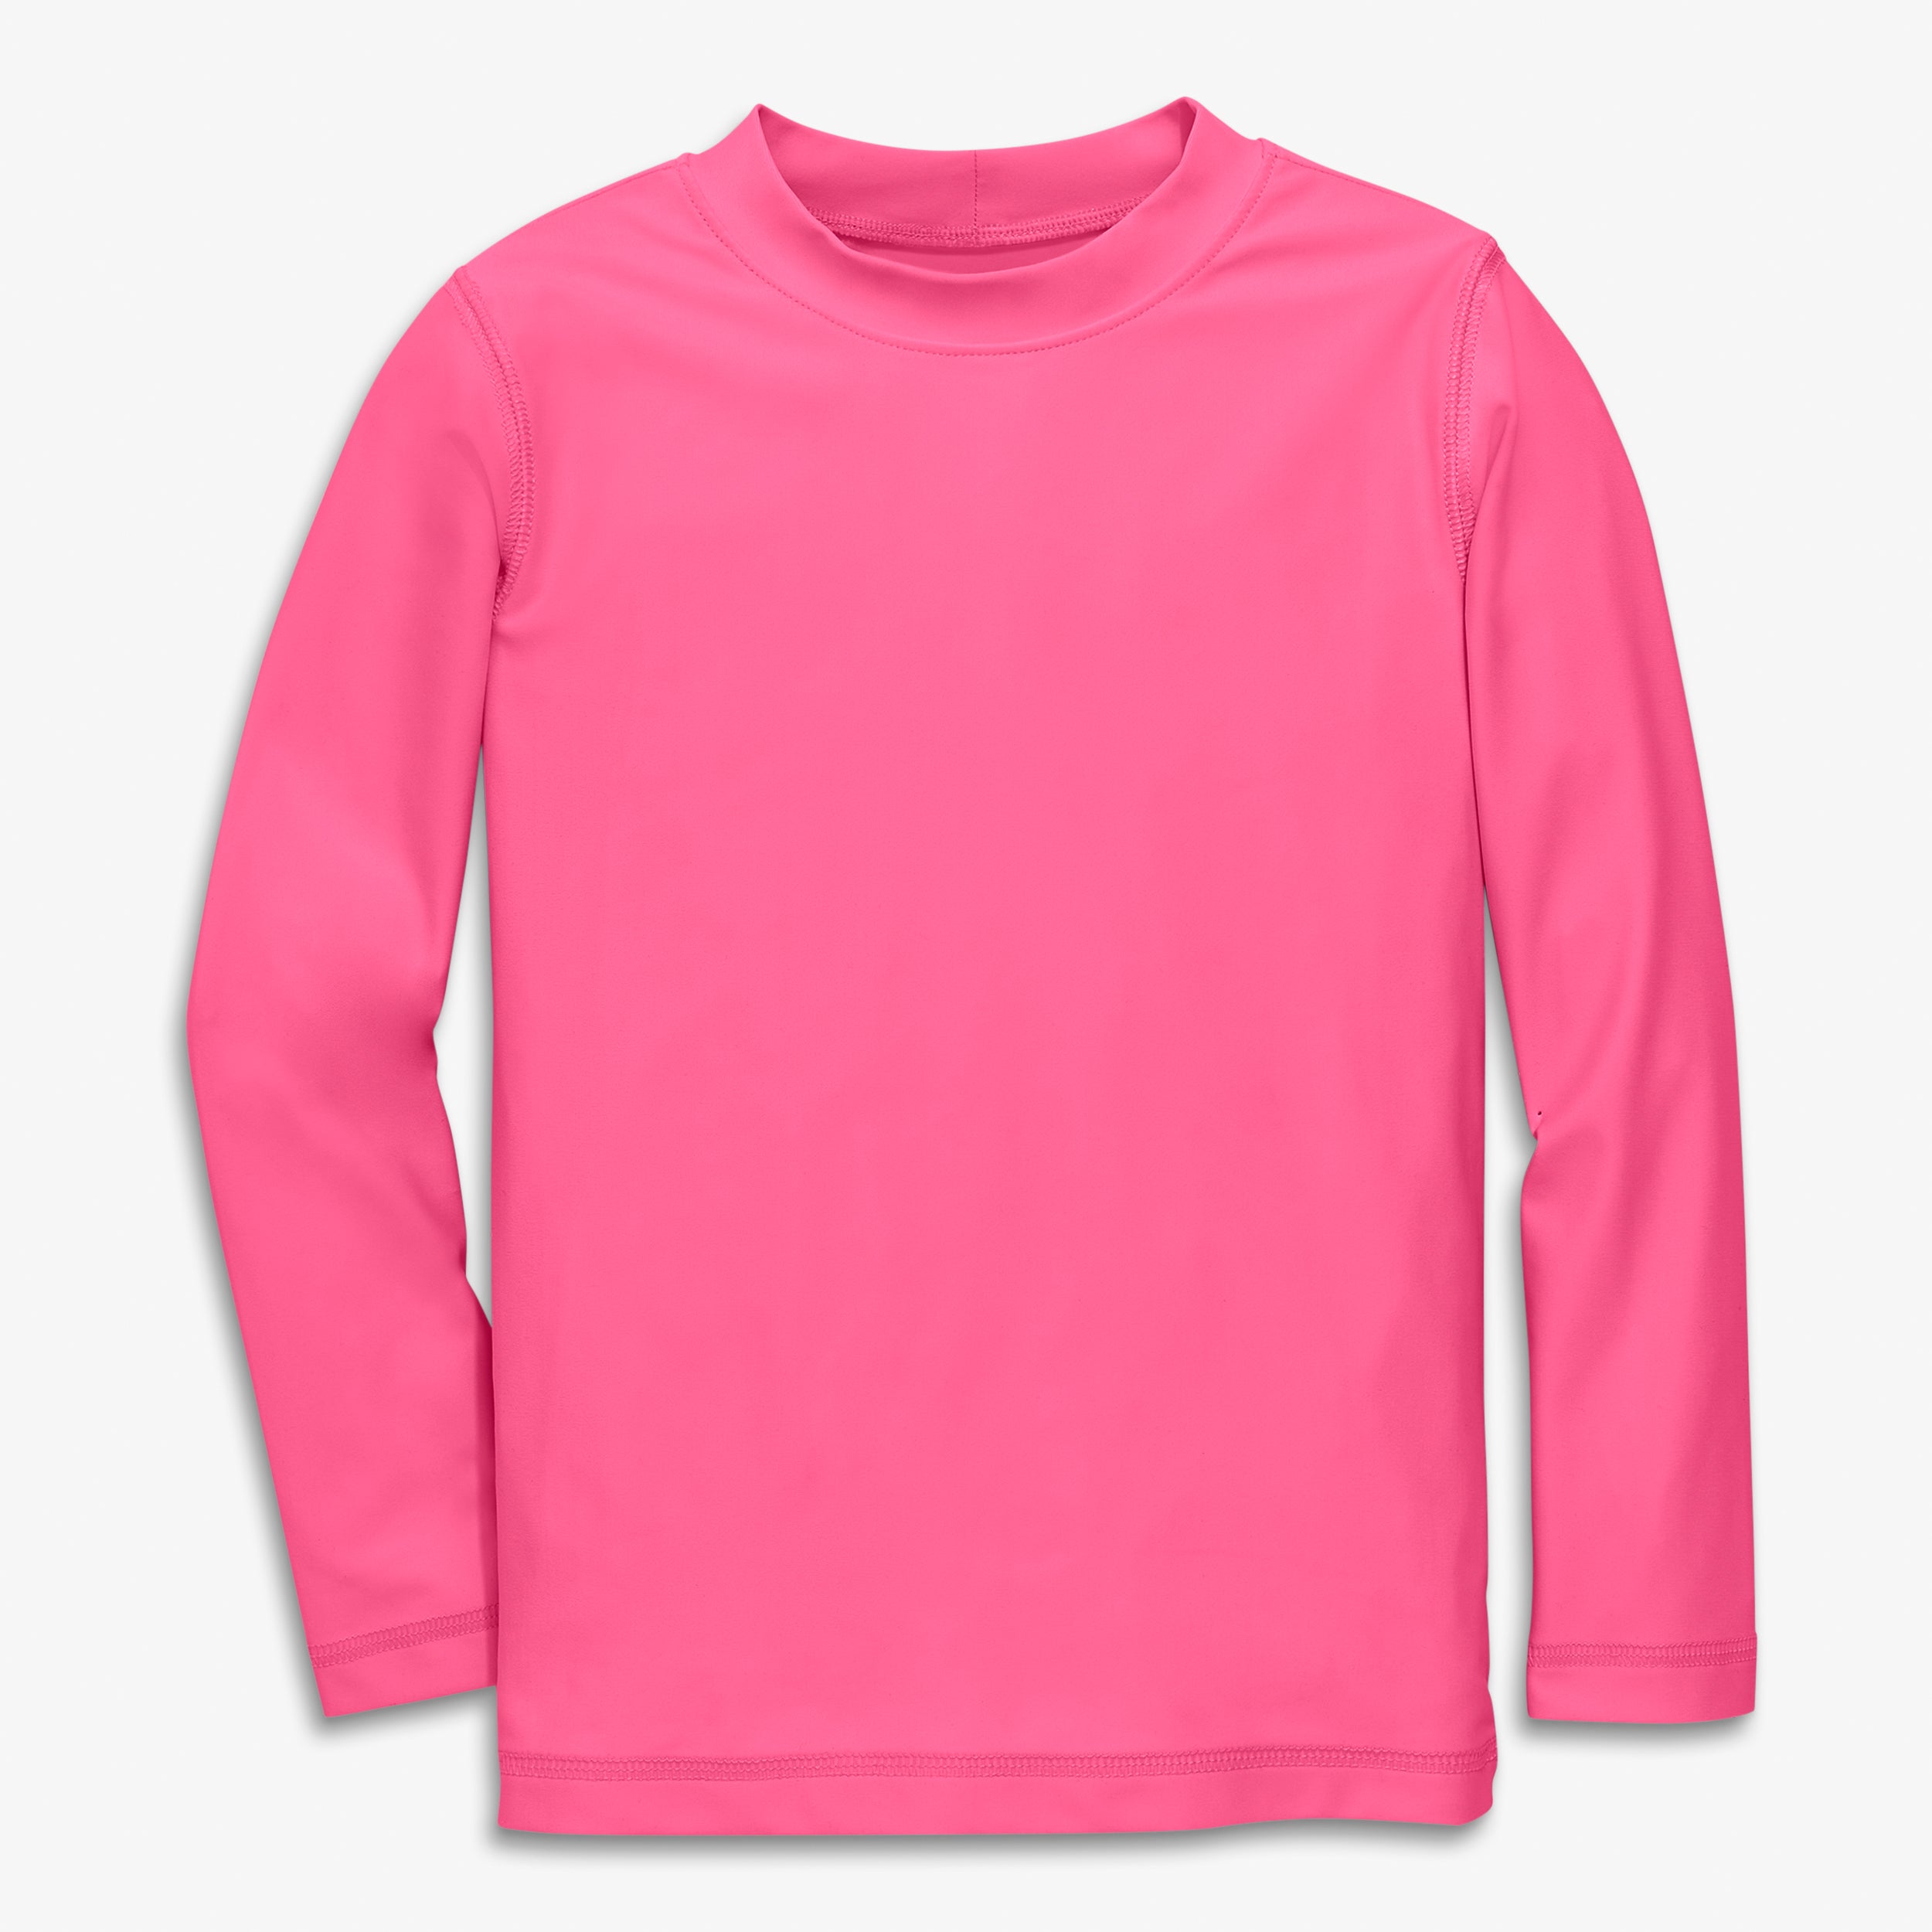 Tee Ladies Long Sleeve Rachguard LV - Educational Outfitters - Tampa